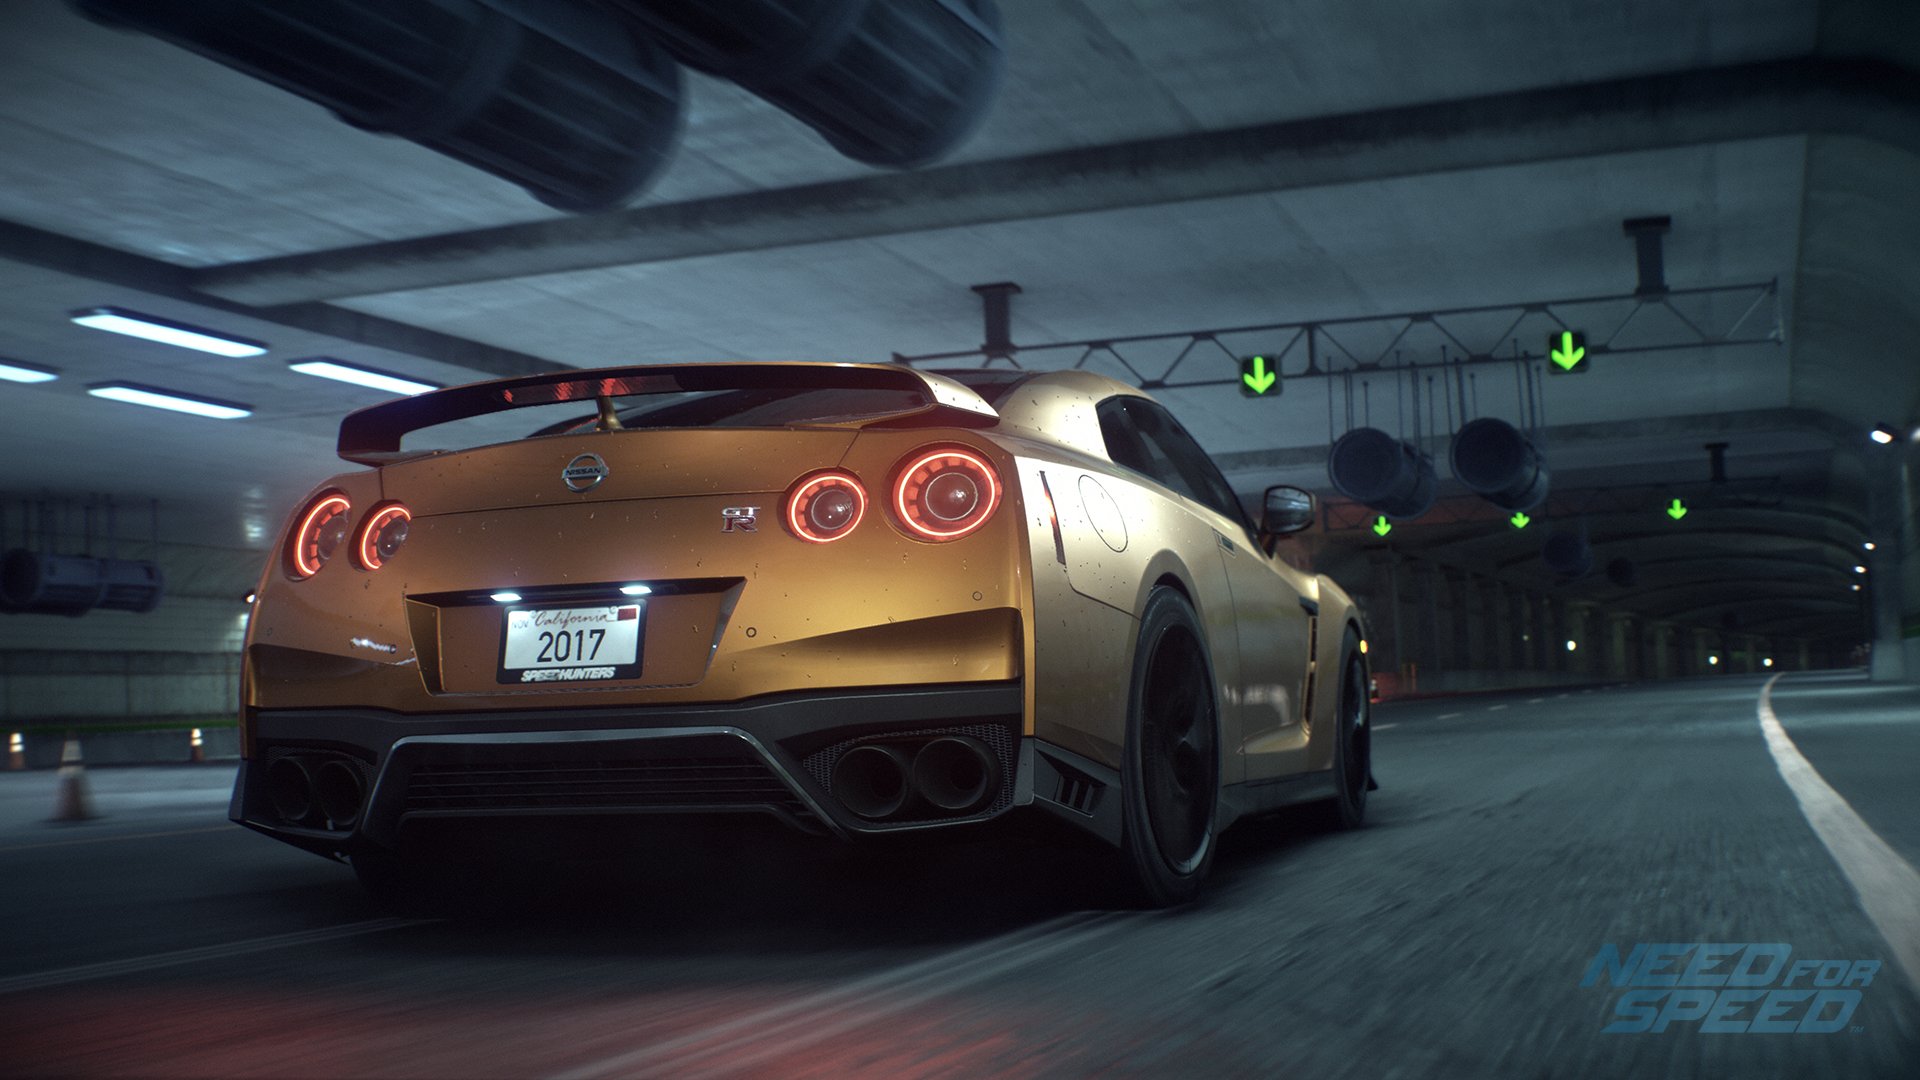 Nissan Gt R Premium Full HD Wallpaper And Background